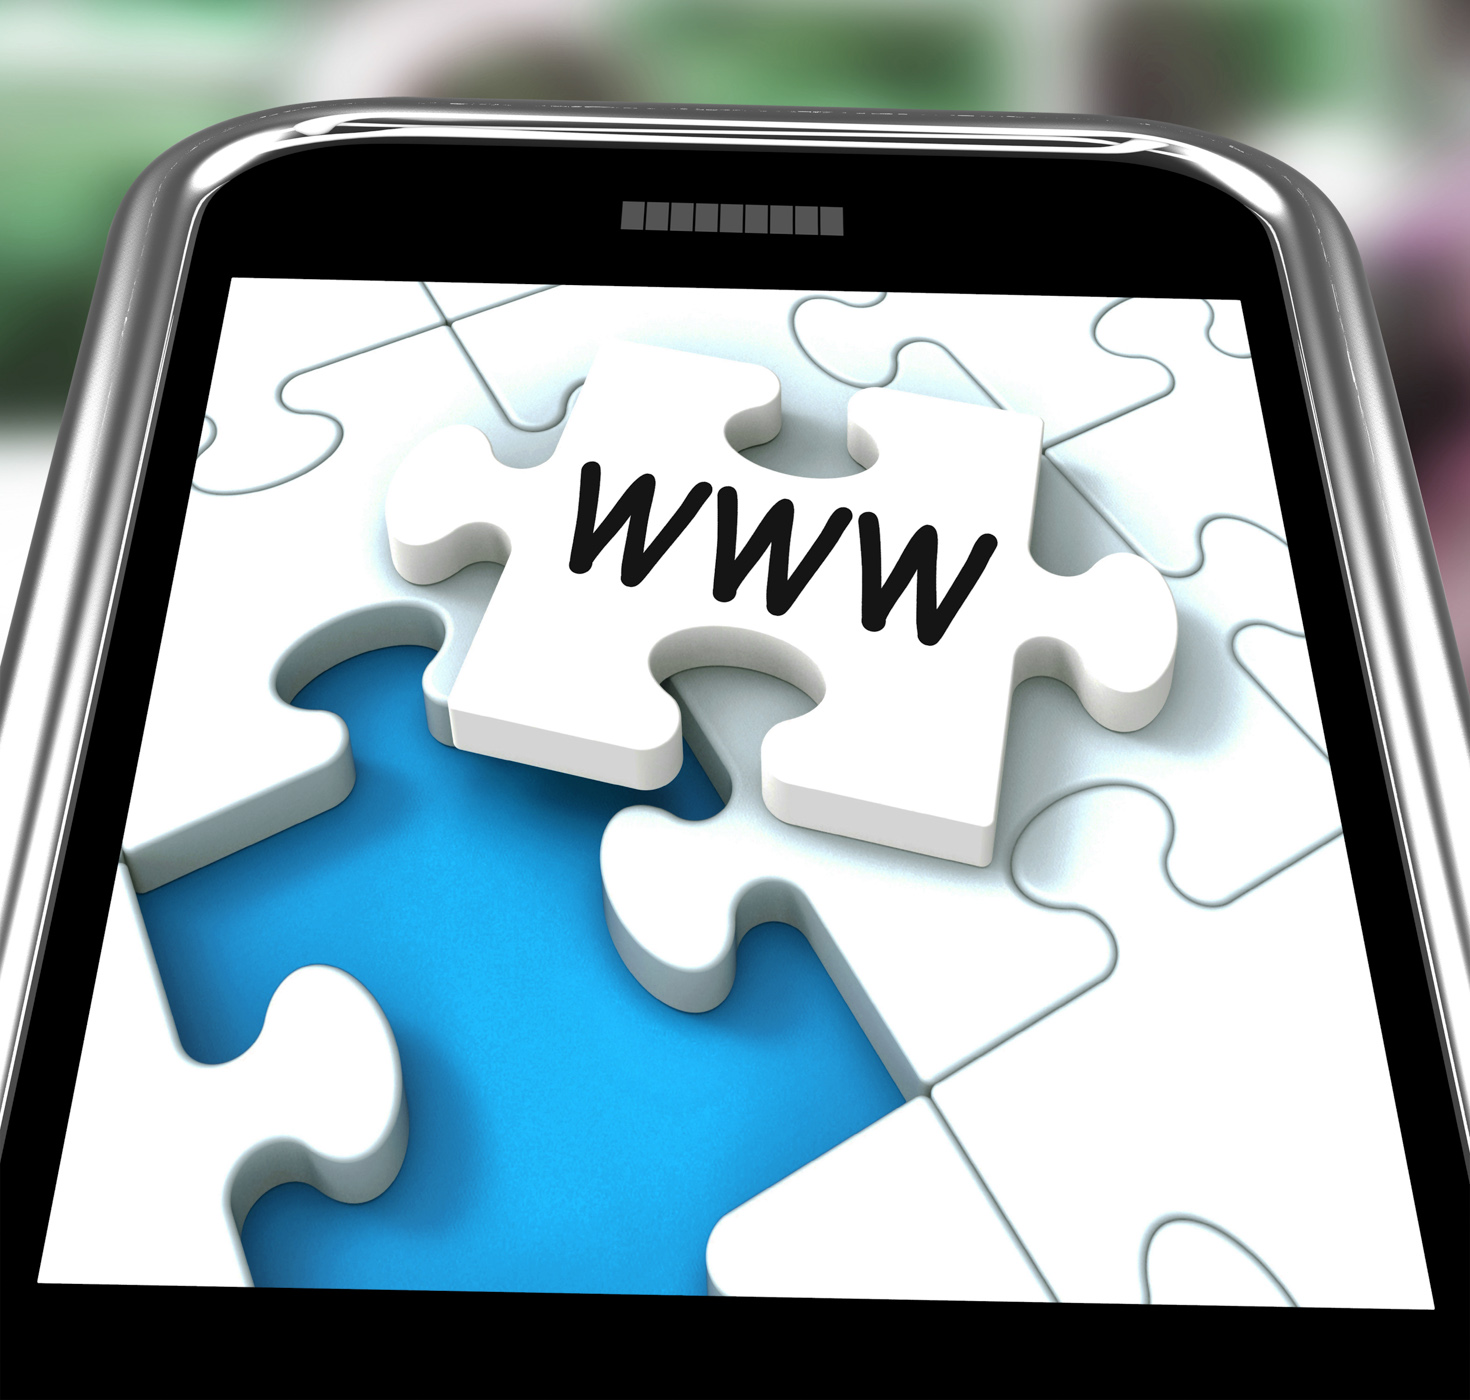 Www smartphone means internet website or network photo